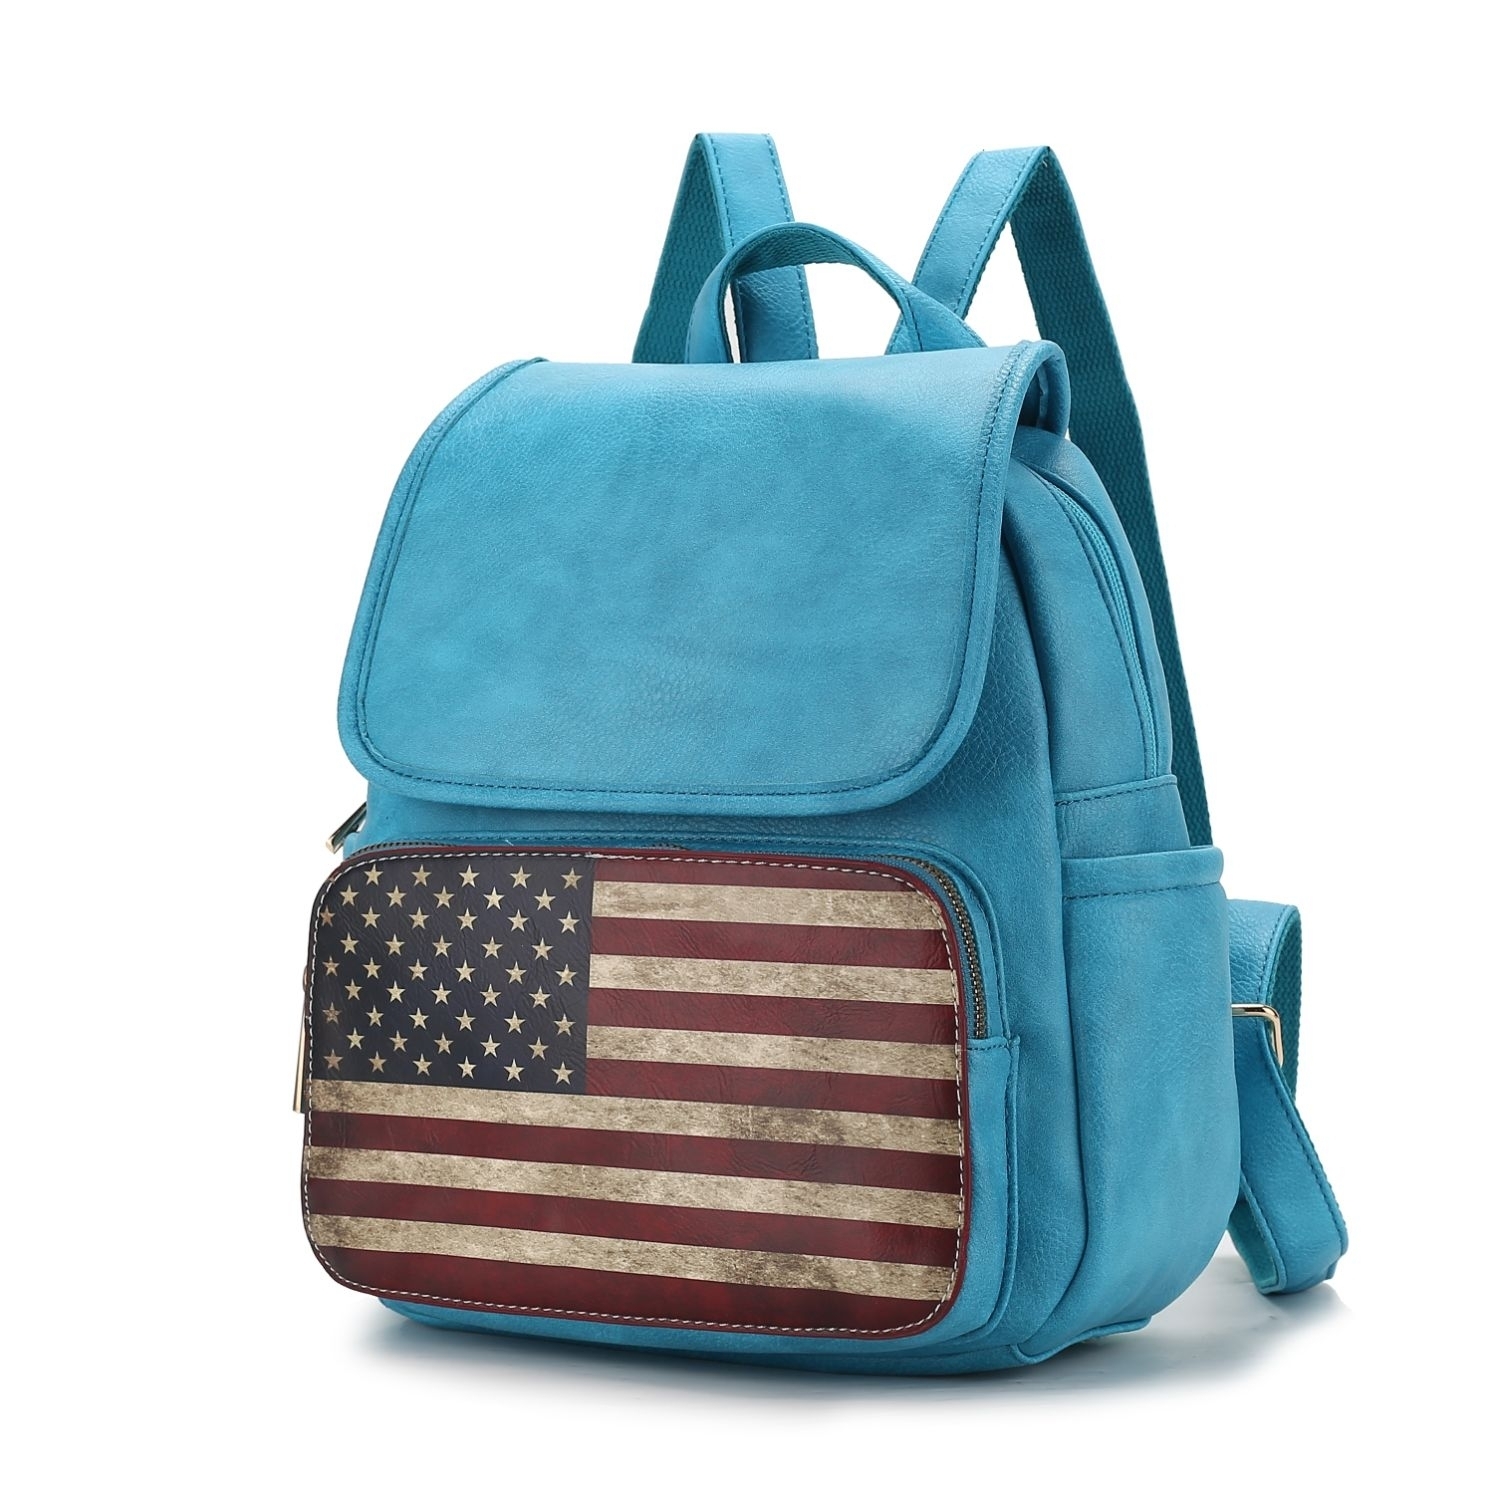 MKF Collection Regina Printed Flag Vegan Leather Womens Backpack By Mia K - Turquoise